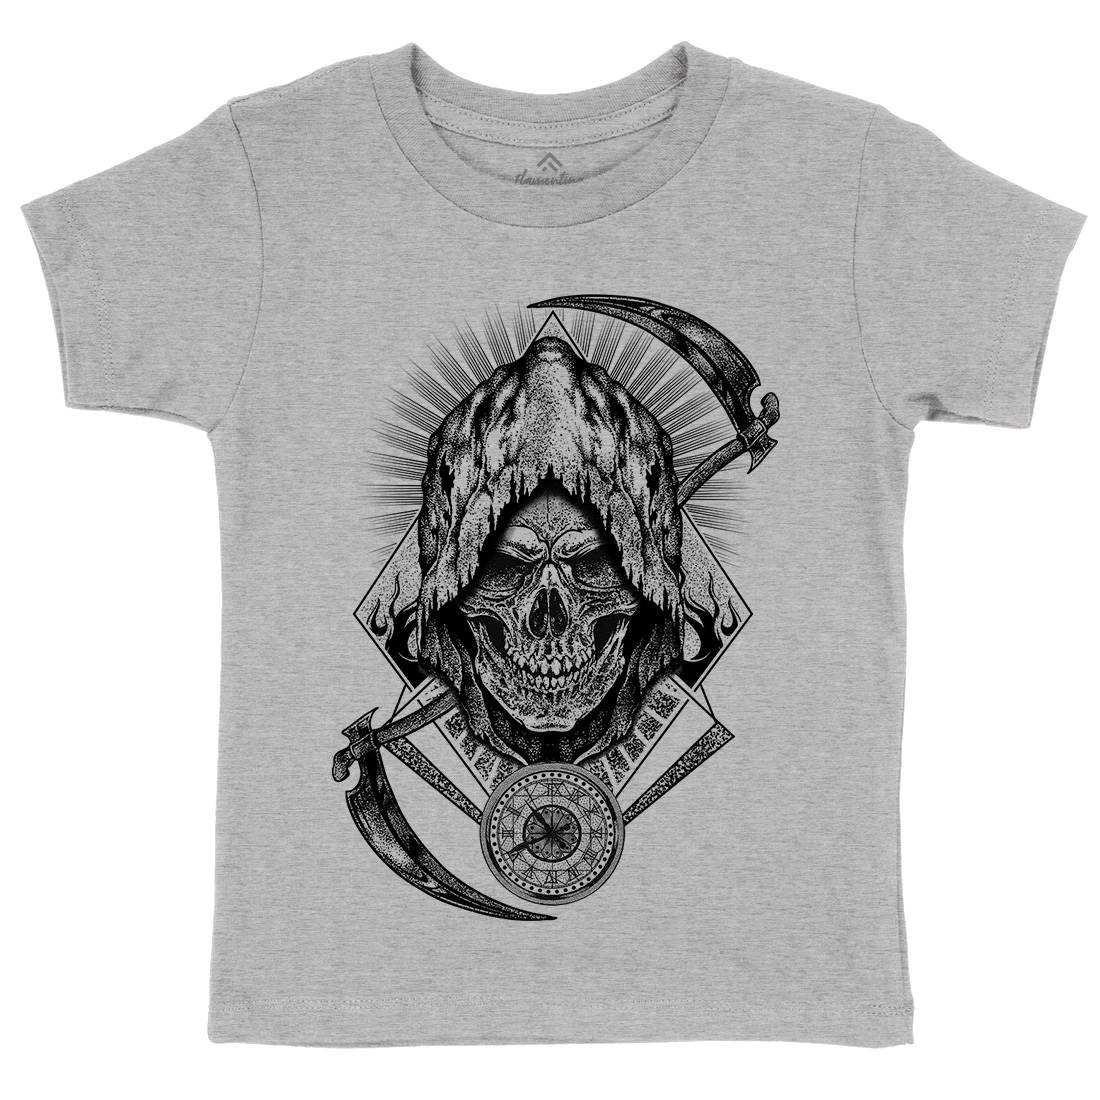 Your Time Has Arrived Kids Organic Crew Neck T-Shirt Horror D099